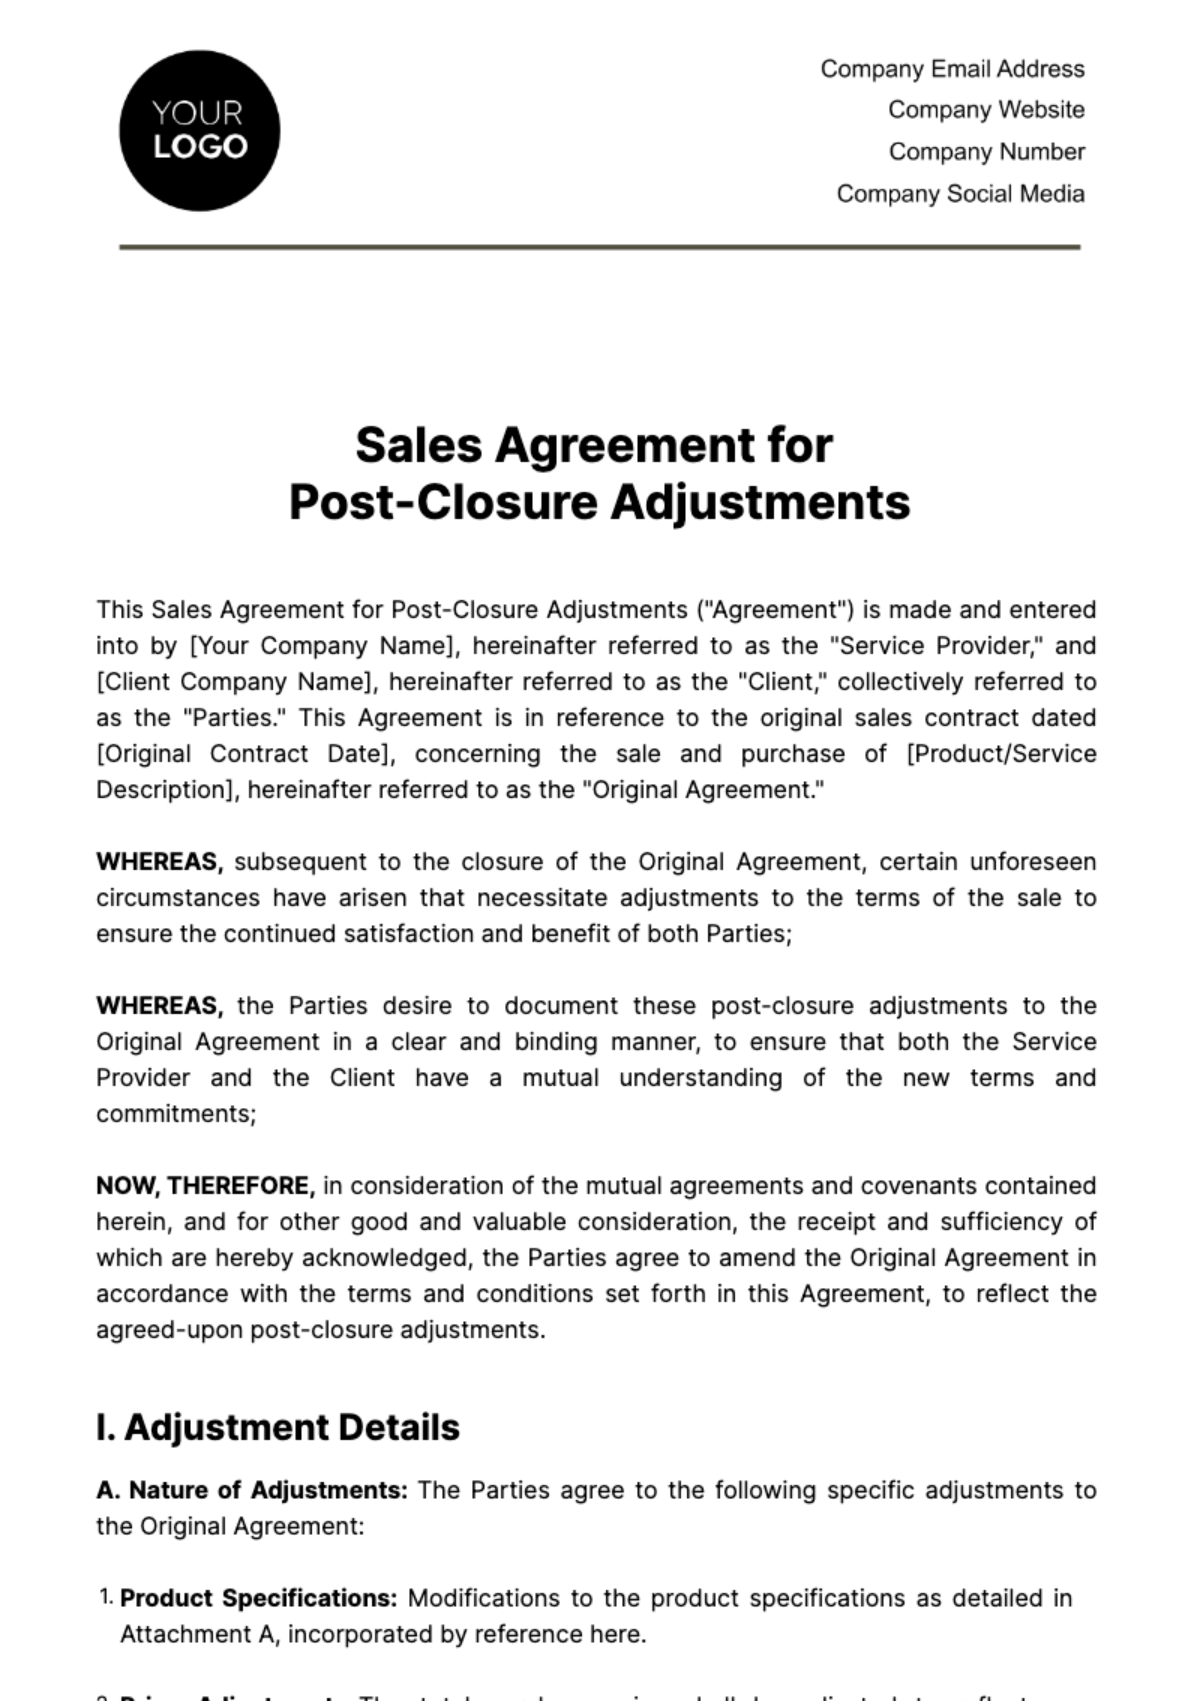 Sales Agreement for Post-Closure Adjustments Template